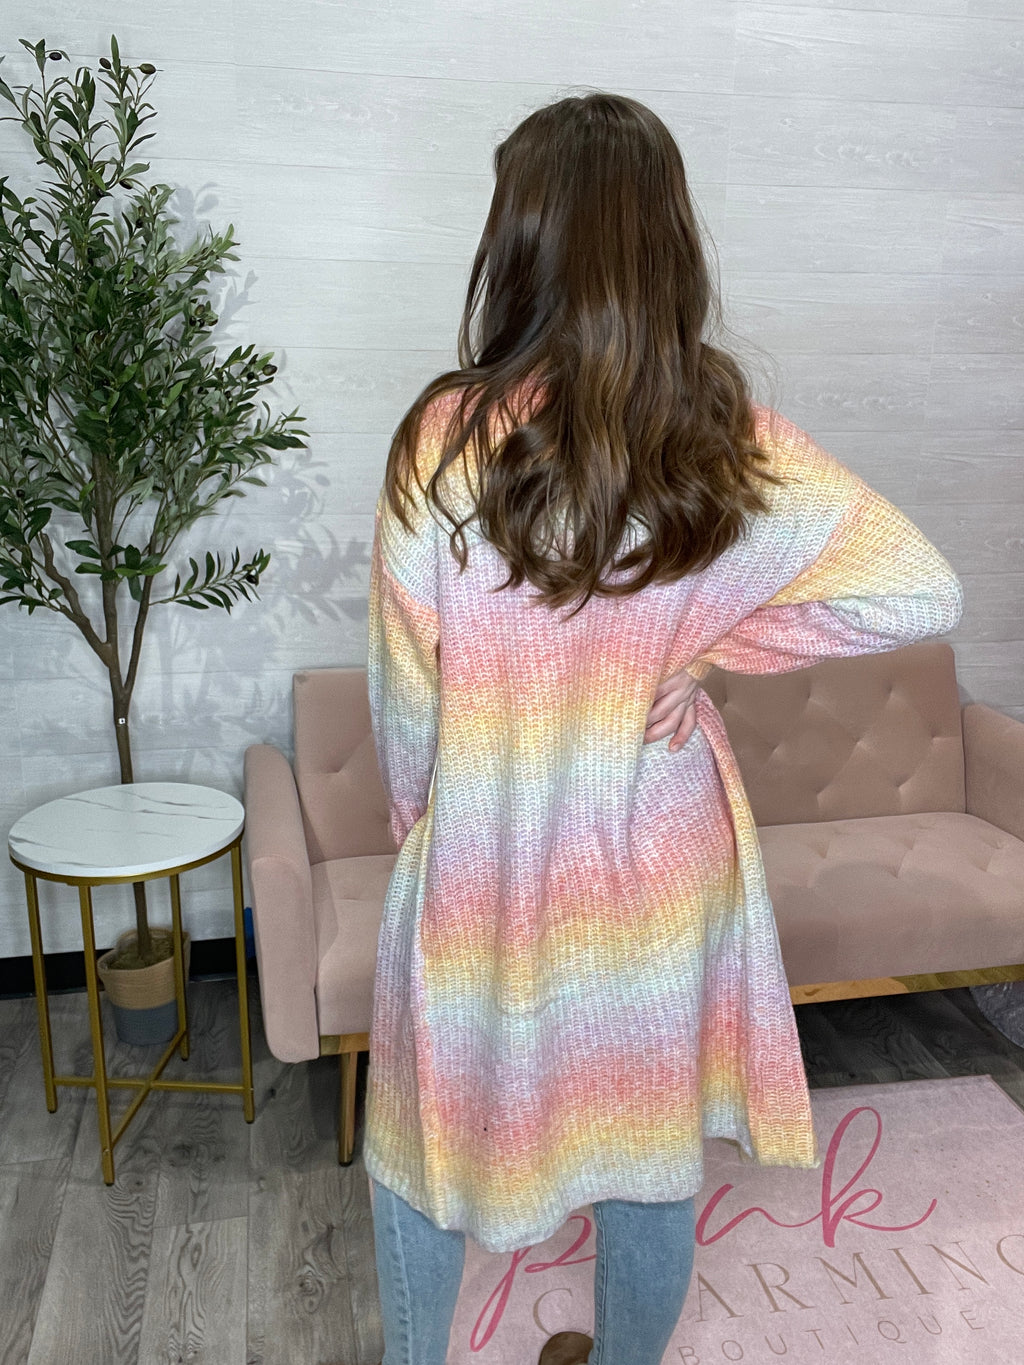 Electra Cardigan Sweater in Rainbow Ombre by Another Love